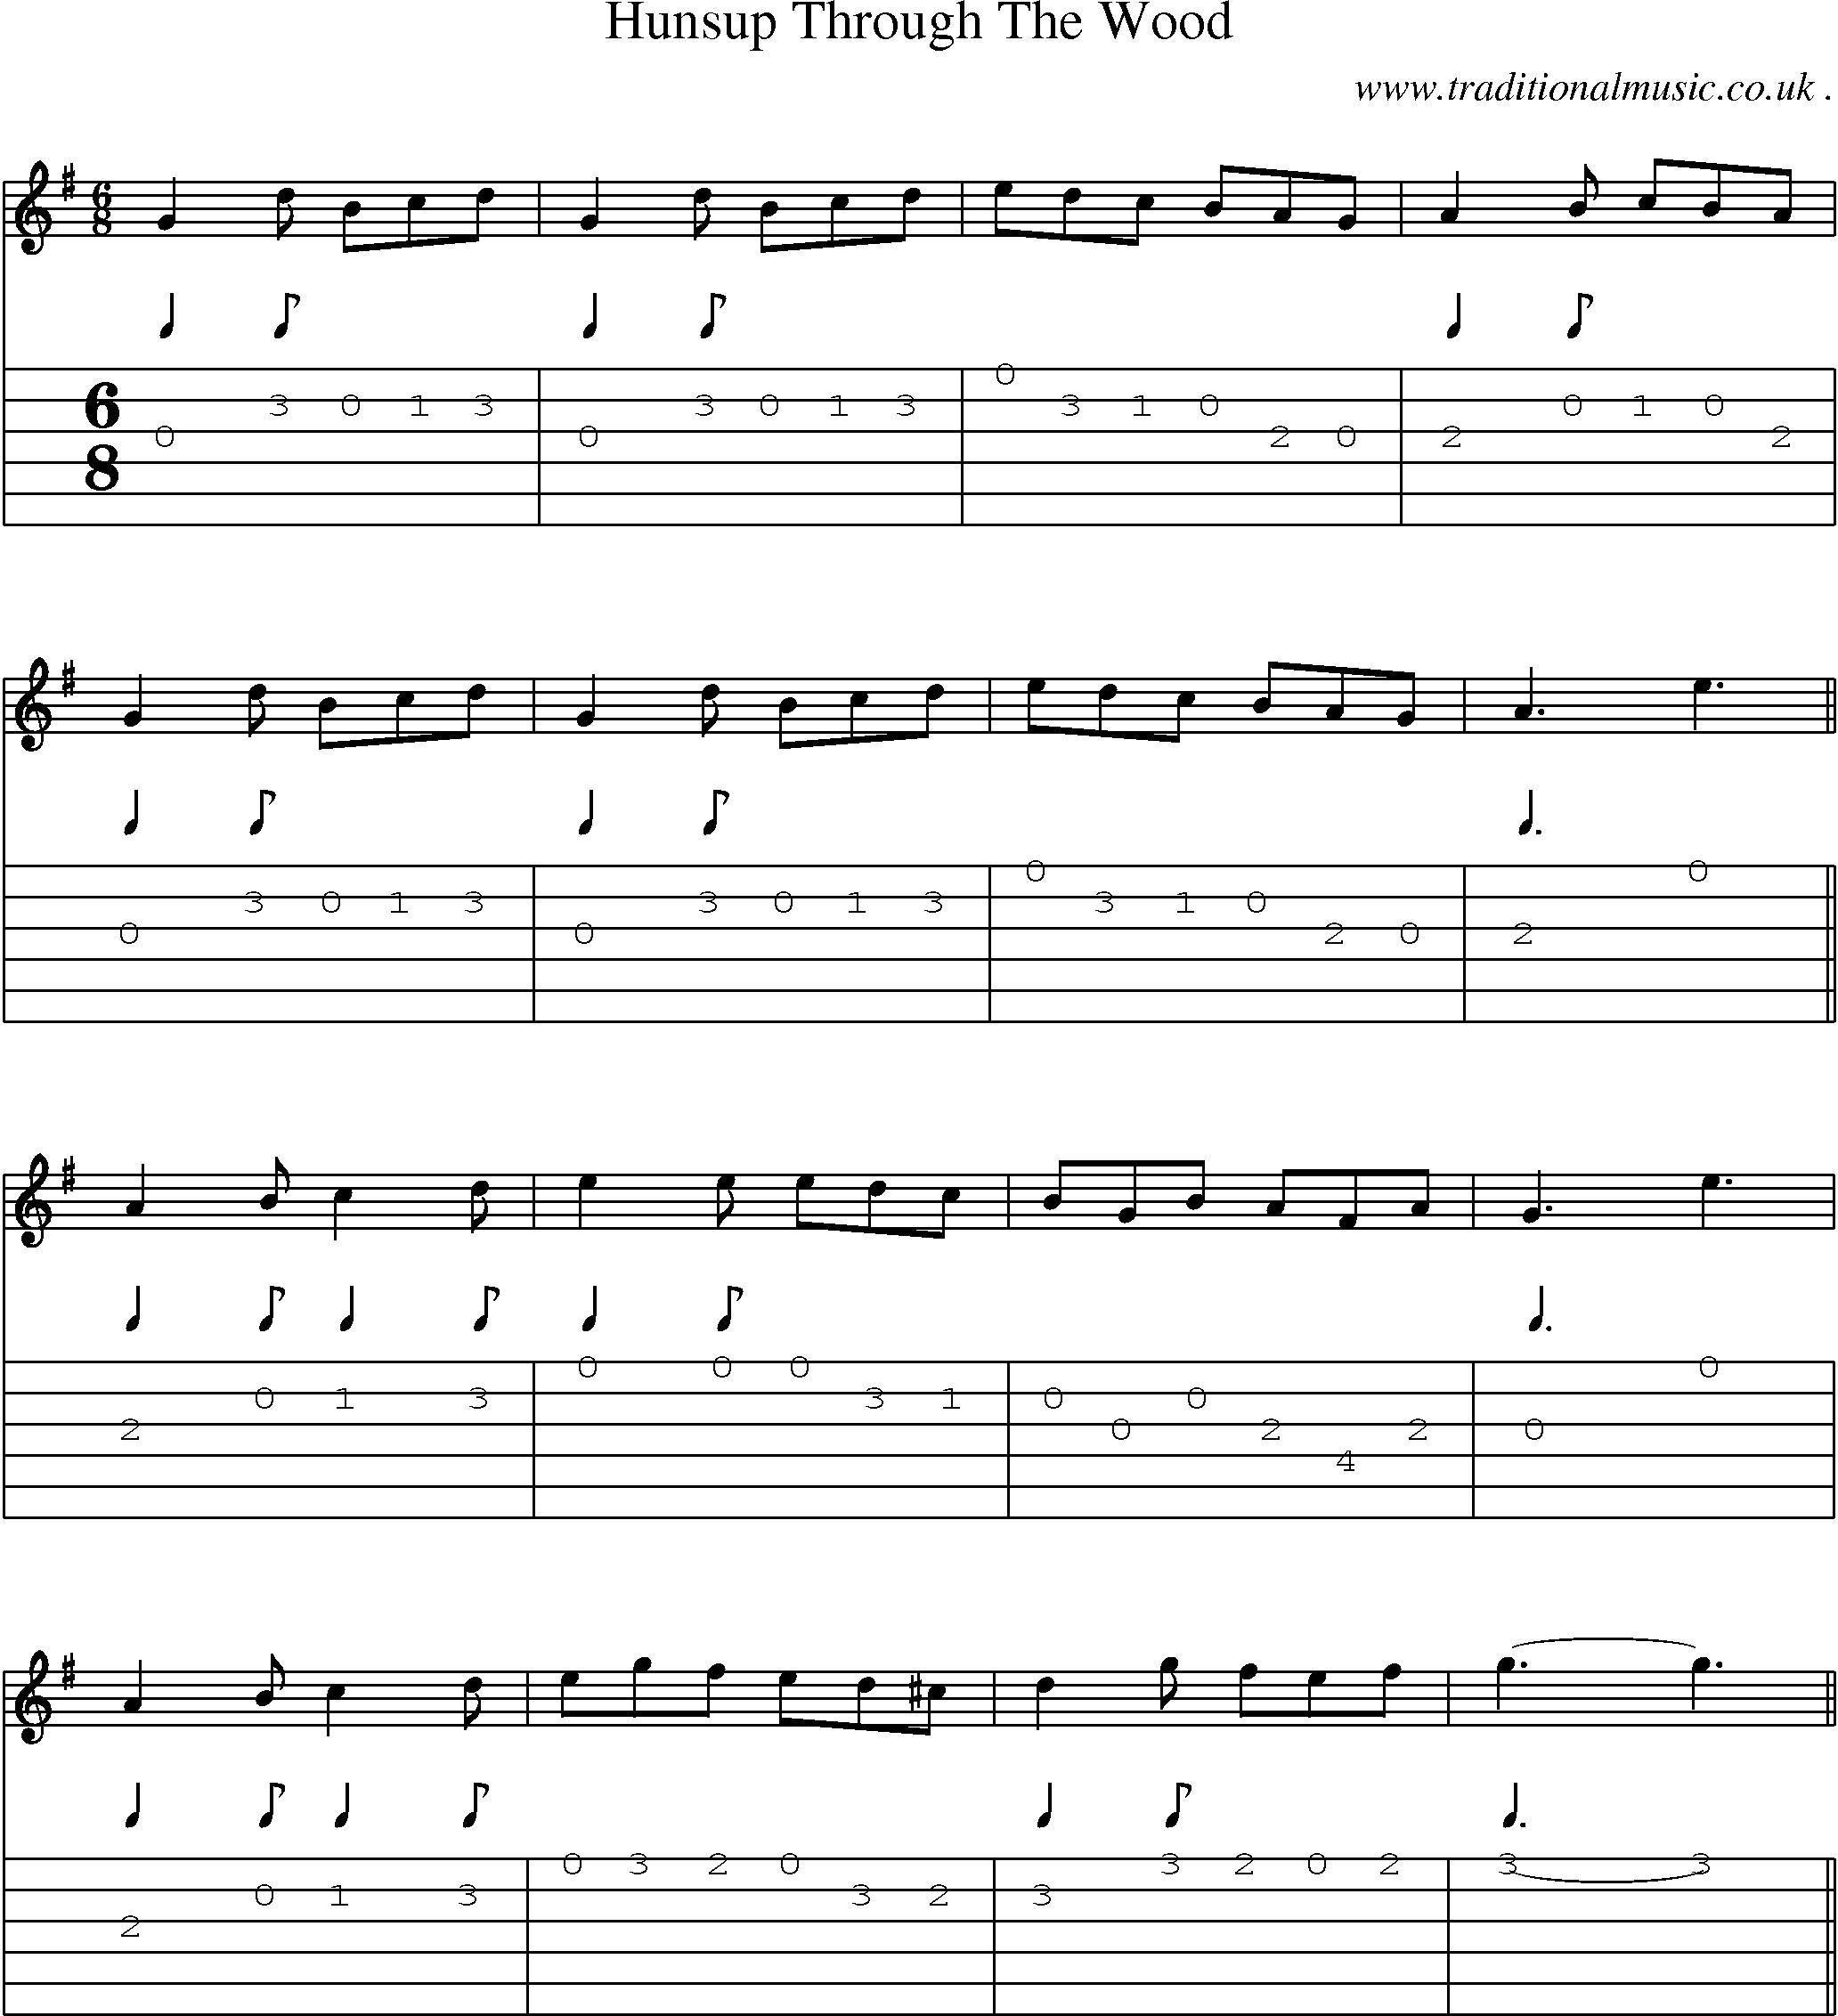 Sheet-Music and Guitar Tabs for Hunsup Through The Wood